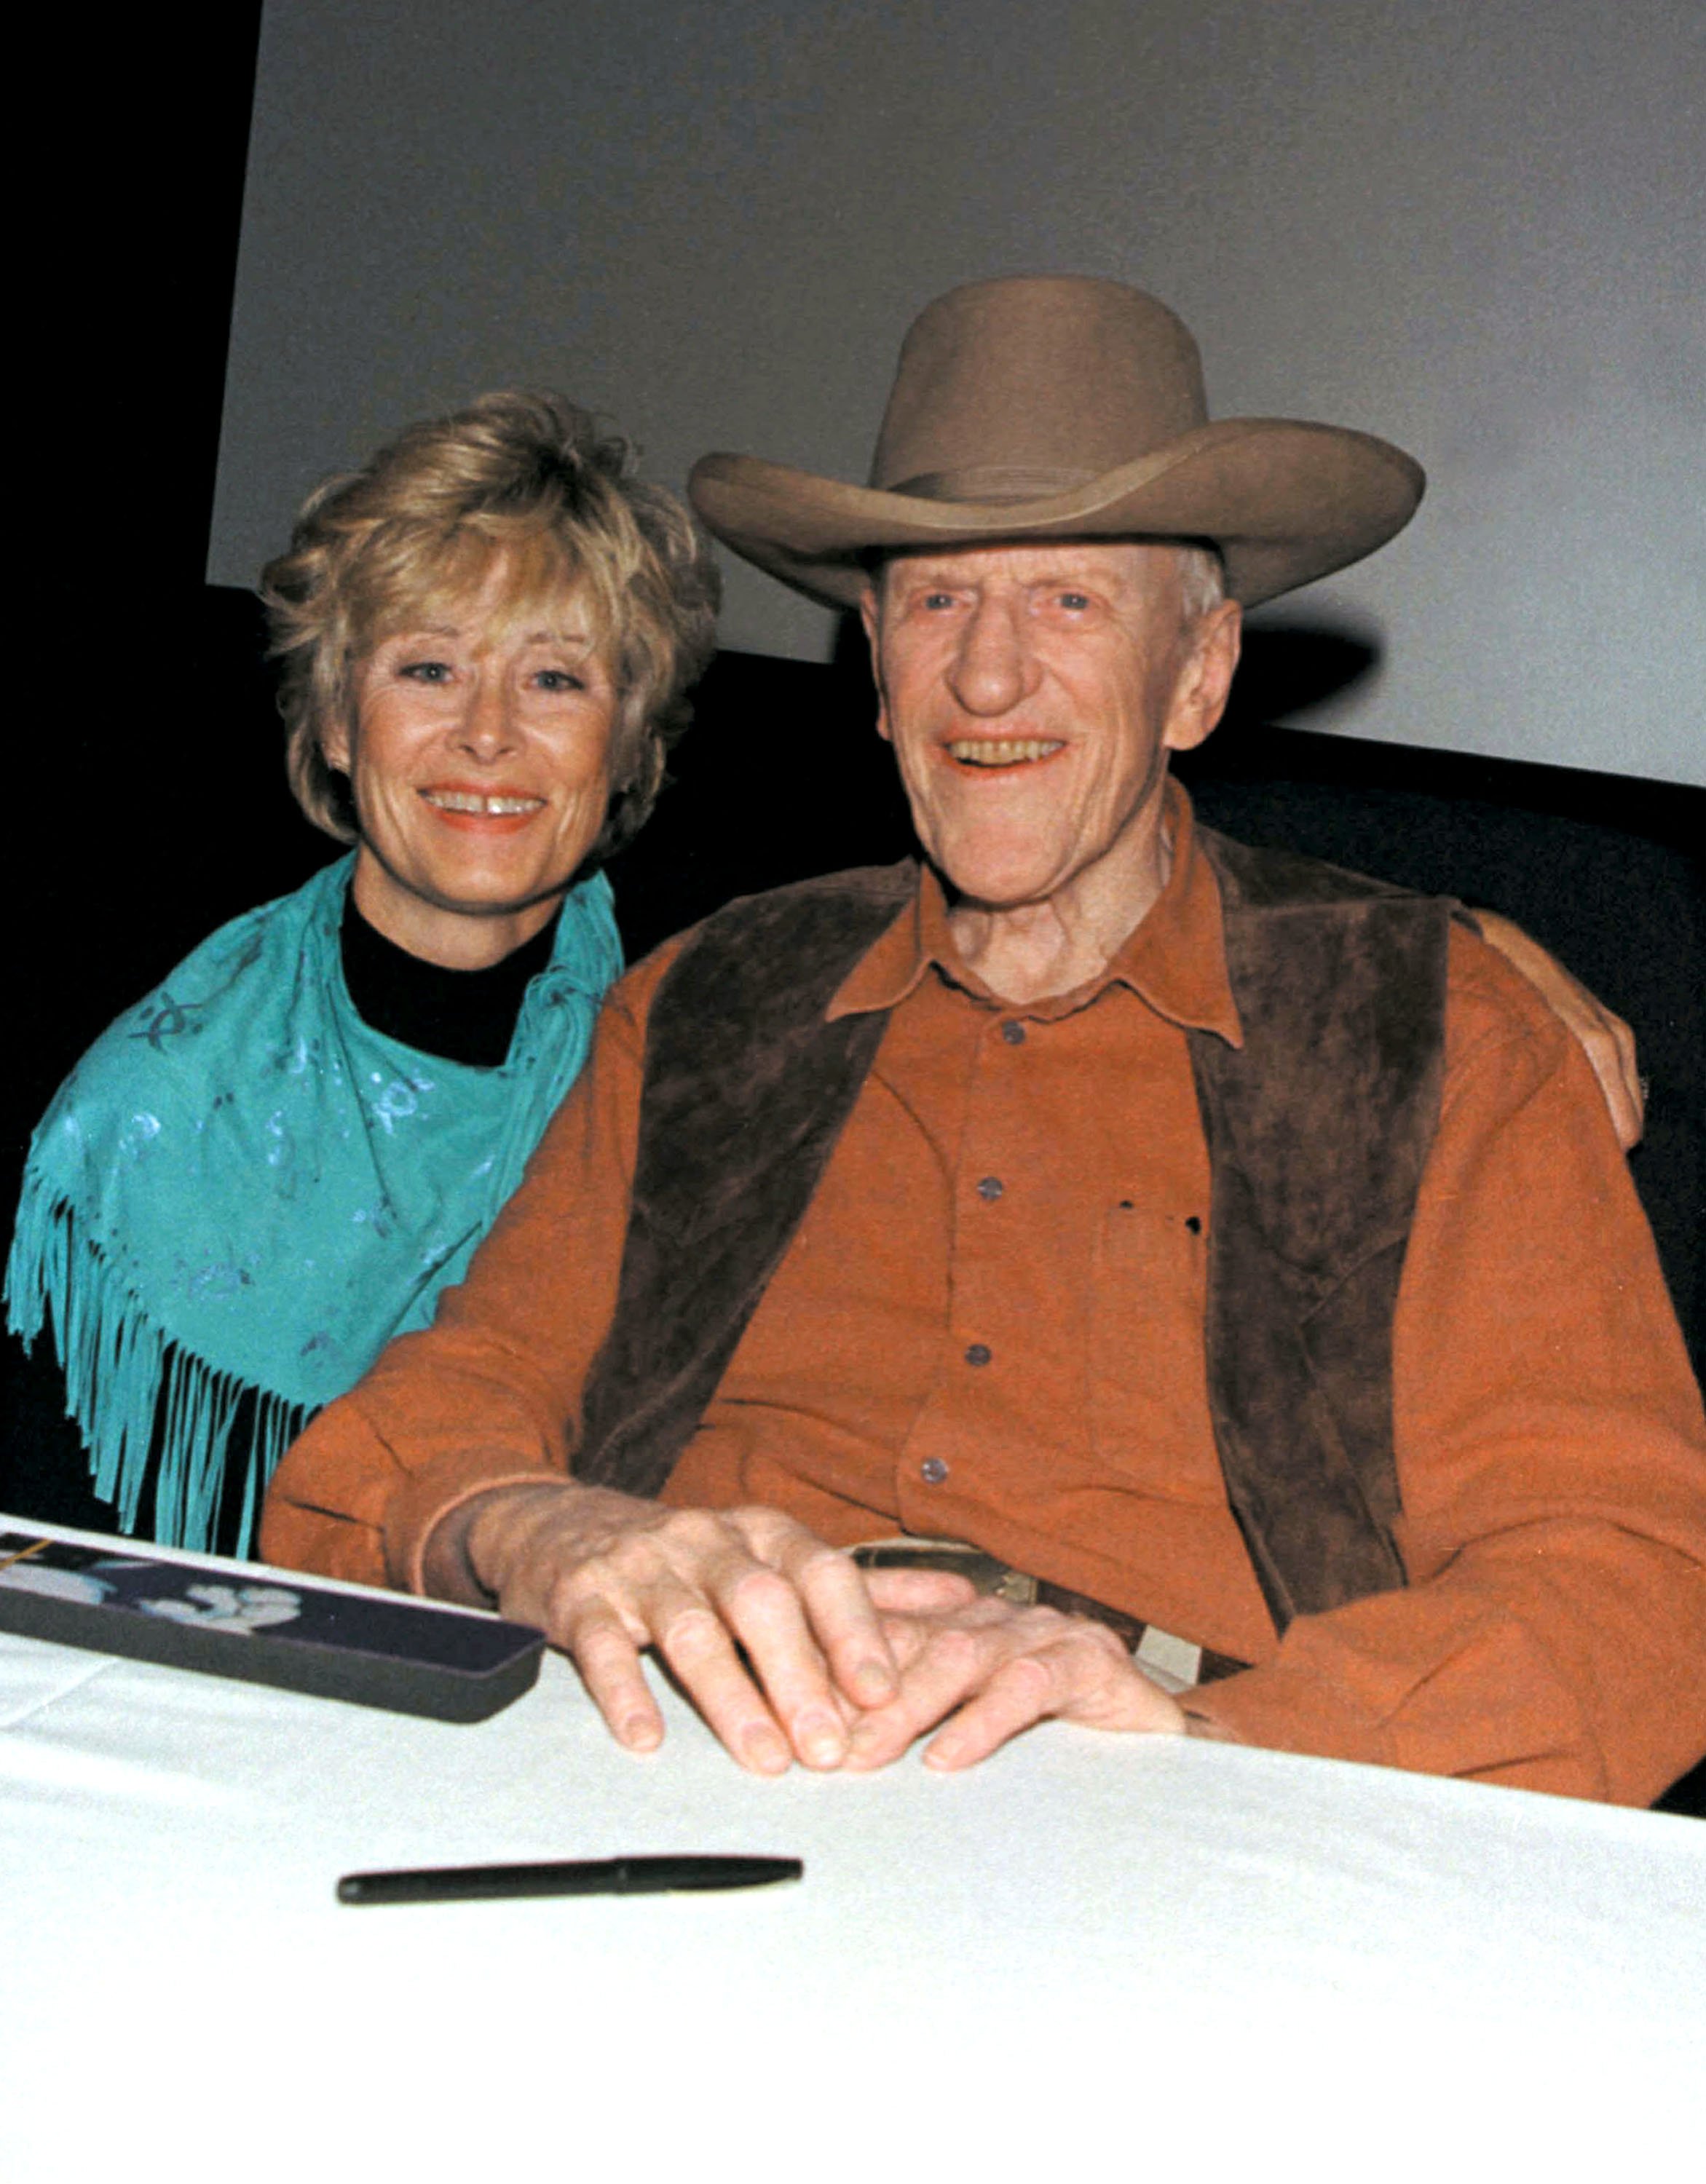 : Actor James Arness poses with his wife Janet during a signing of his new book "James Arness: An Autobiography" at the Gene Autry Museum November 3, 2001 in Los Angeles, CA. | Source: Getty Images